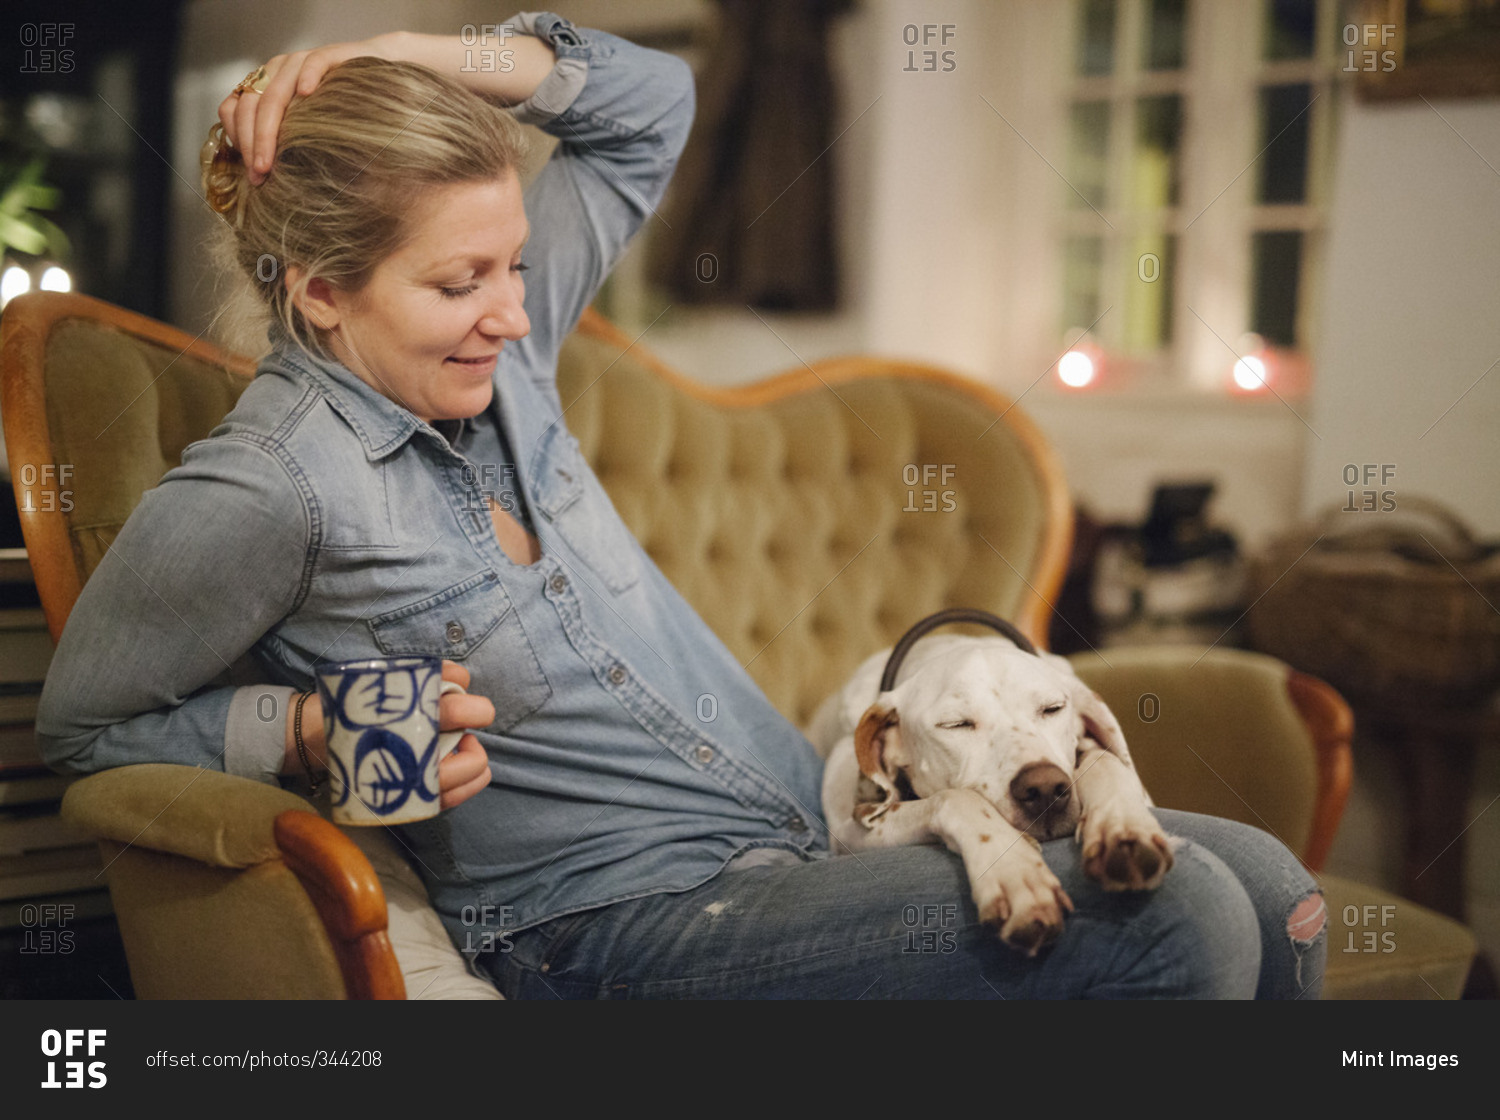 A woman seated on a sofa with a dog with his head on her lap